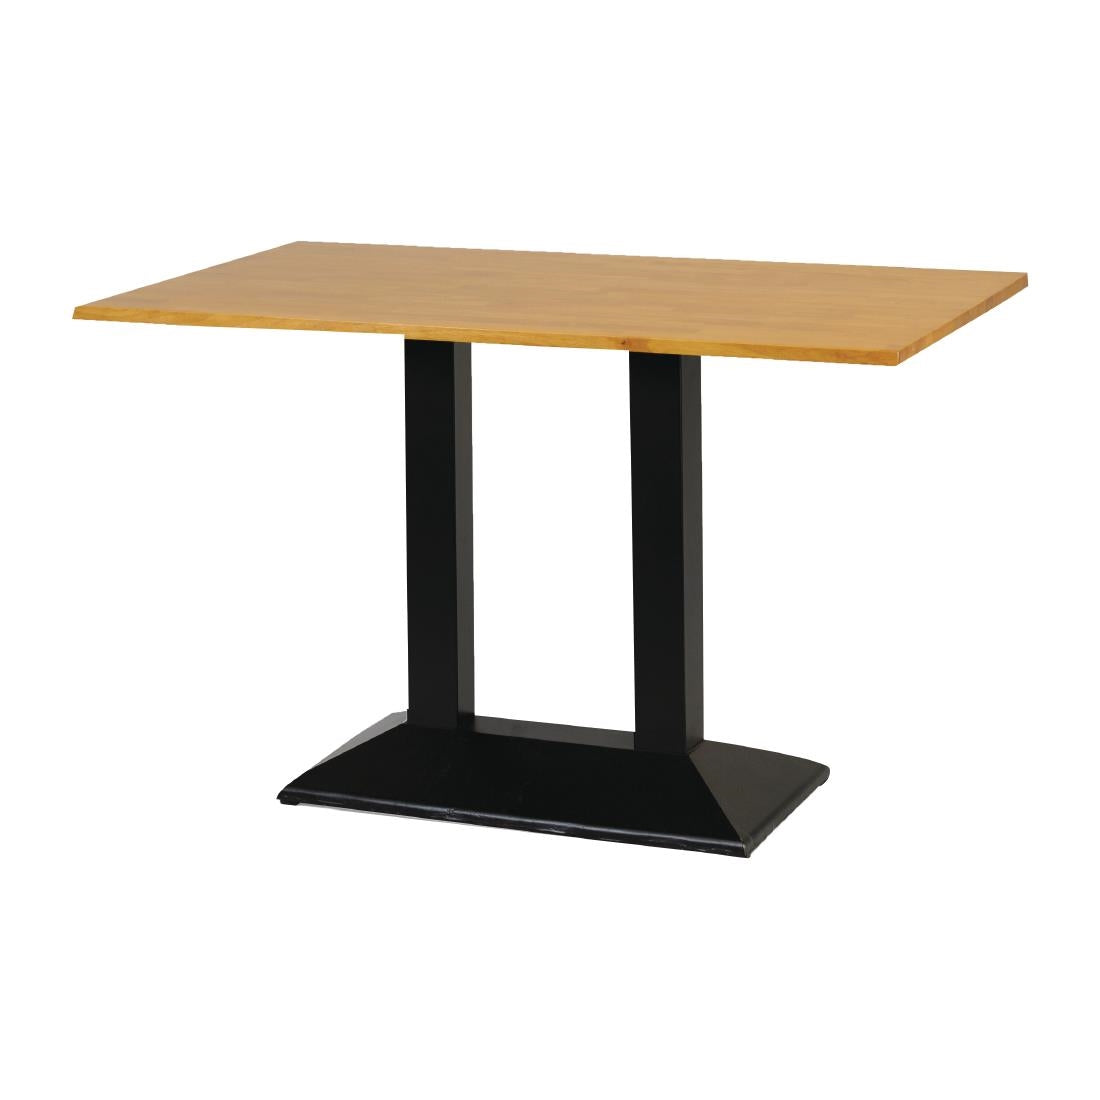 FT504 Turin Metal Base Pedestal Rectangle Table with Soft Oak Top 1200x700mm JD Catering Equipment Solutions Ltd